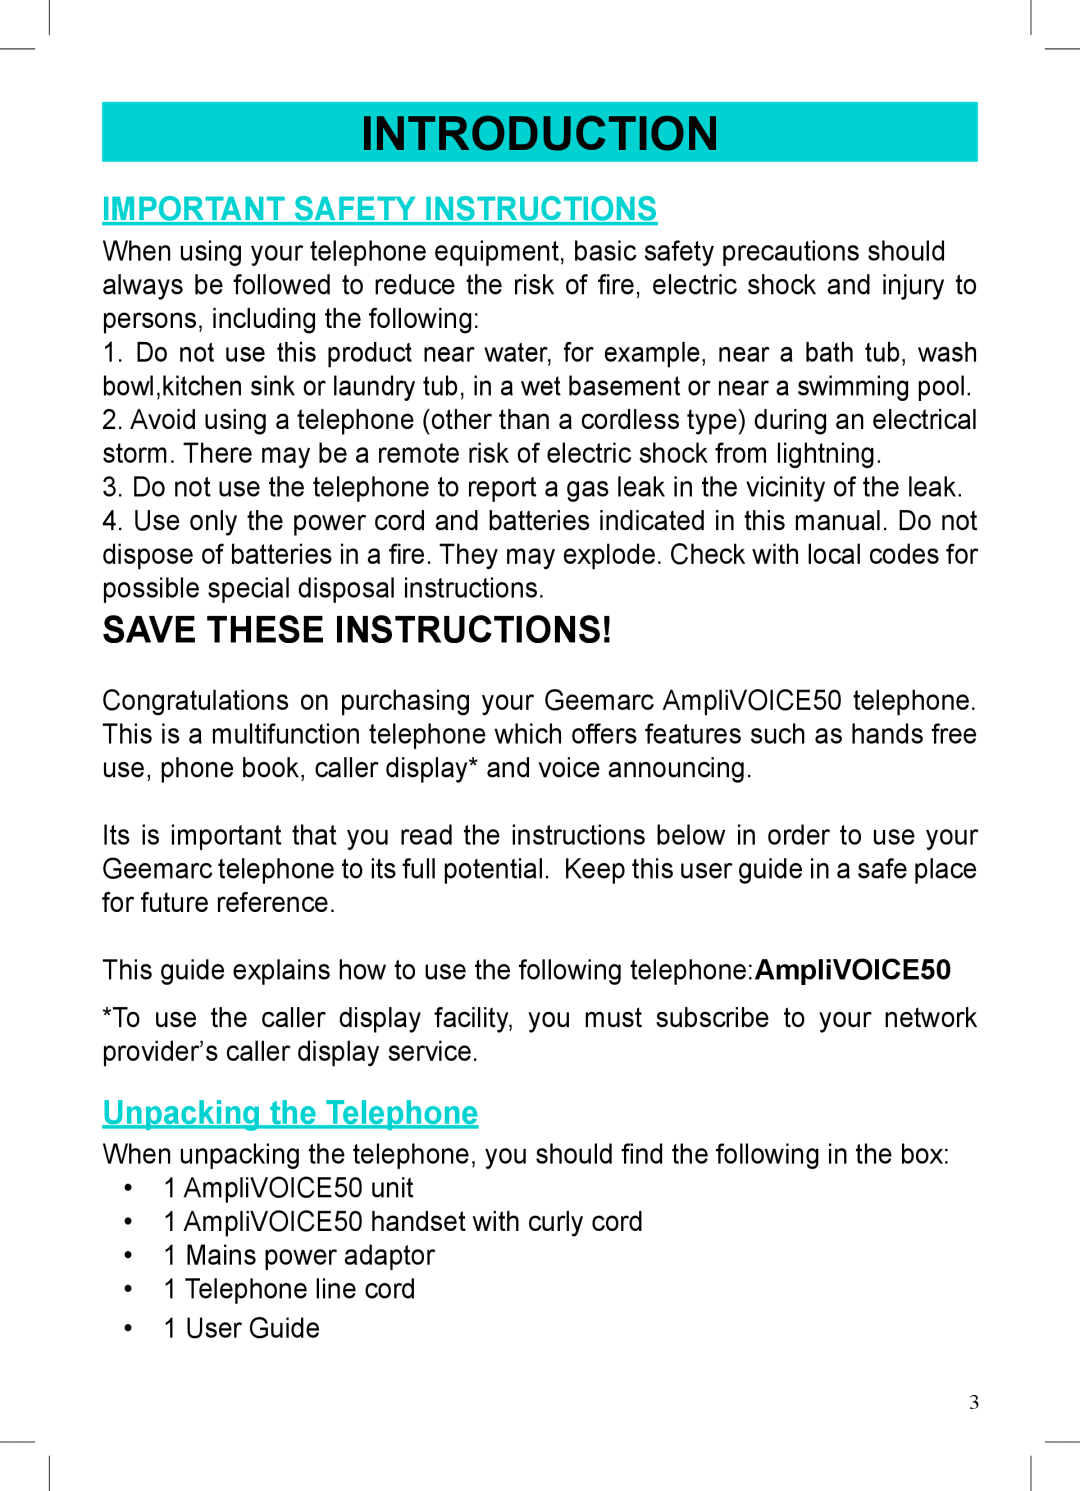 Geemarc AMPLIVOICE50 manual Introduction, Important Safety Instructions, Unpacking the Telephone, Save These Instructions 